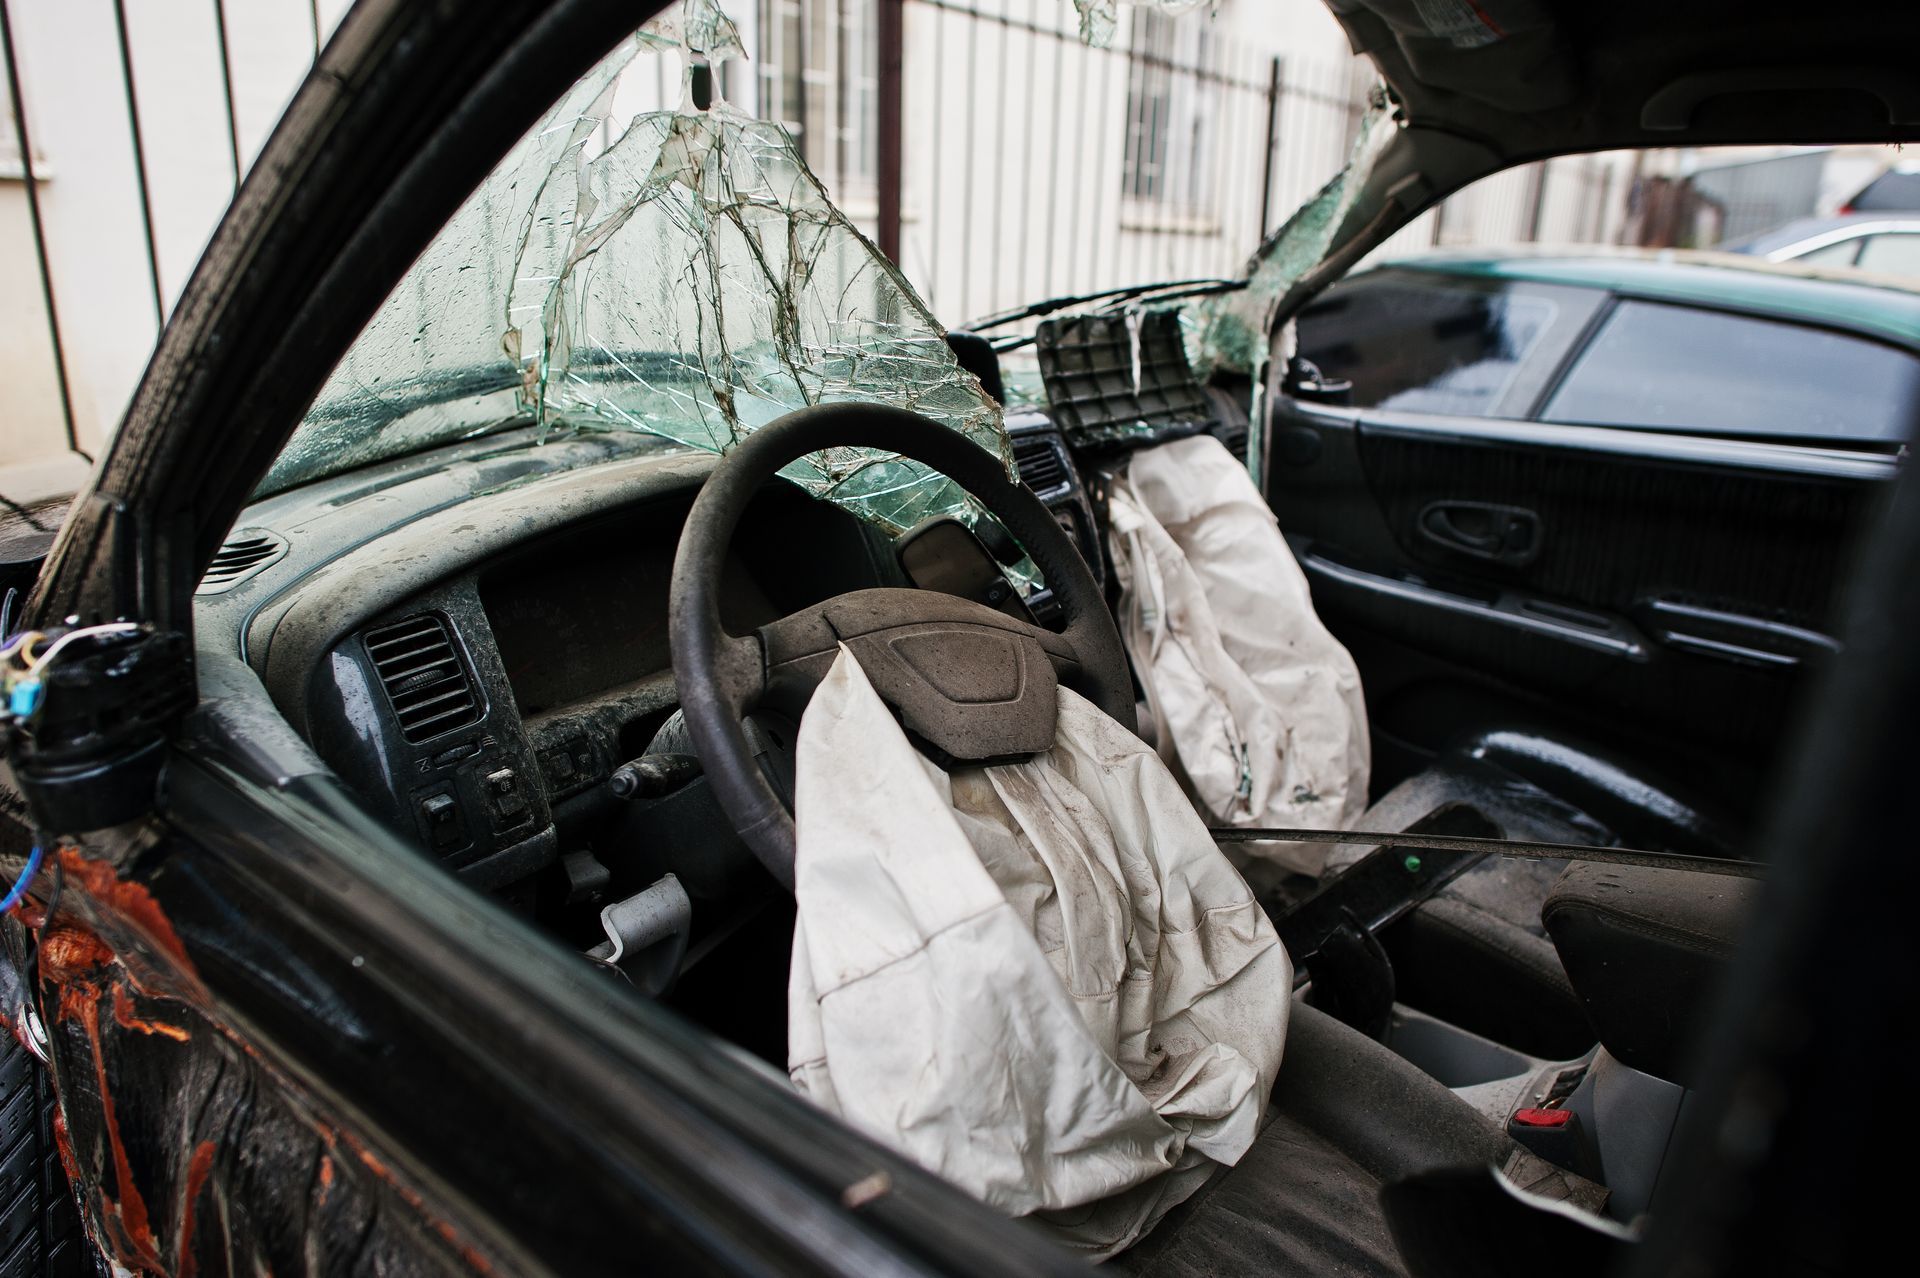 Car in a Motor Vehicle Accident with Released Airbags